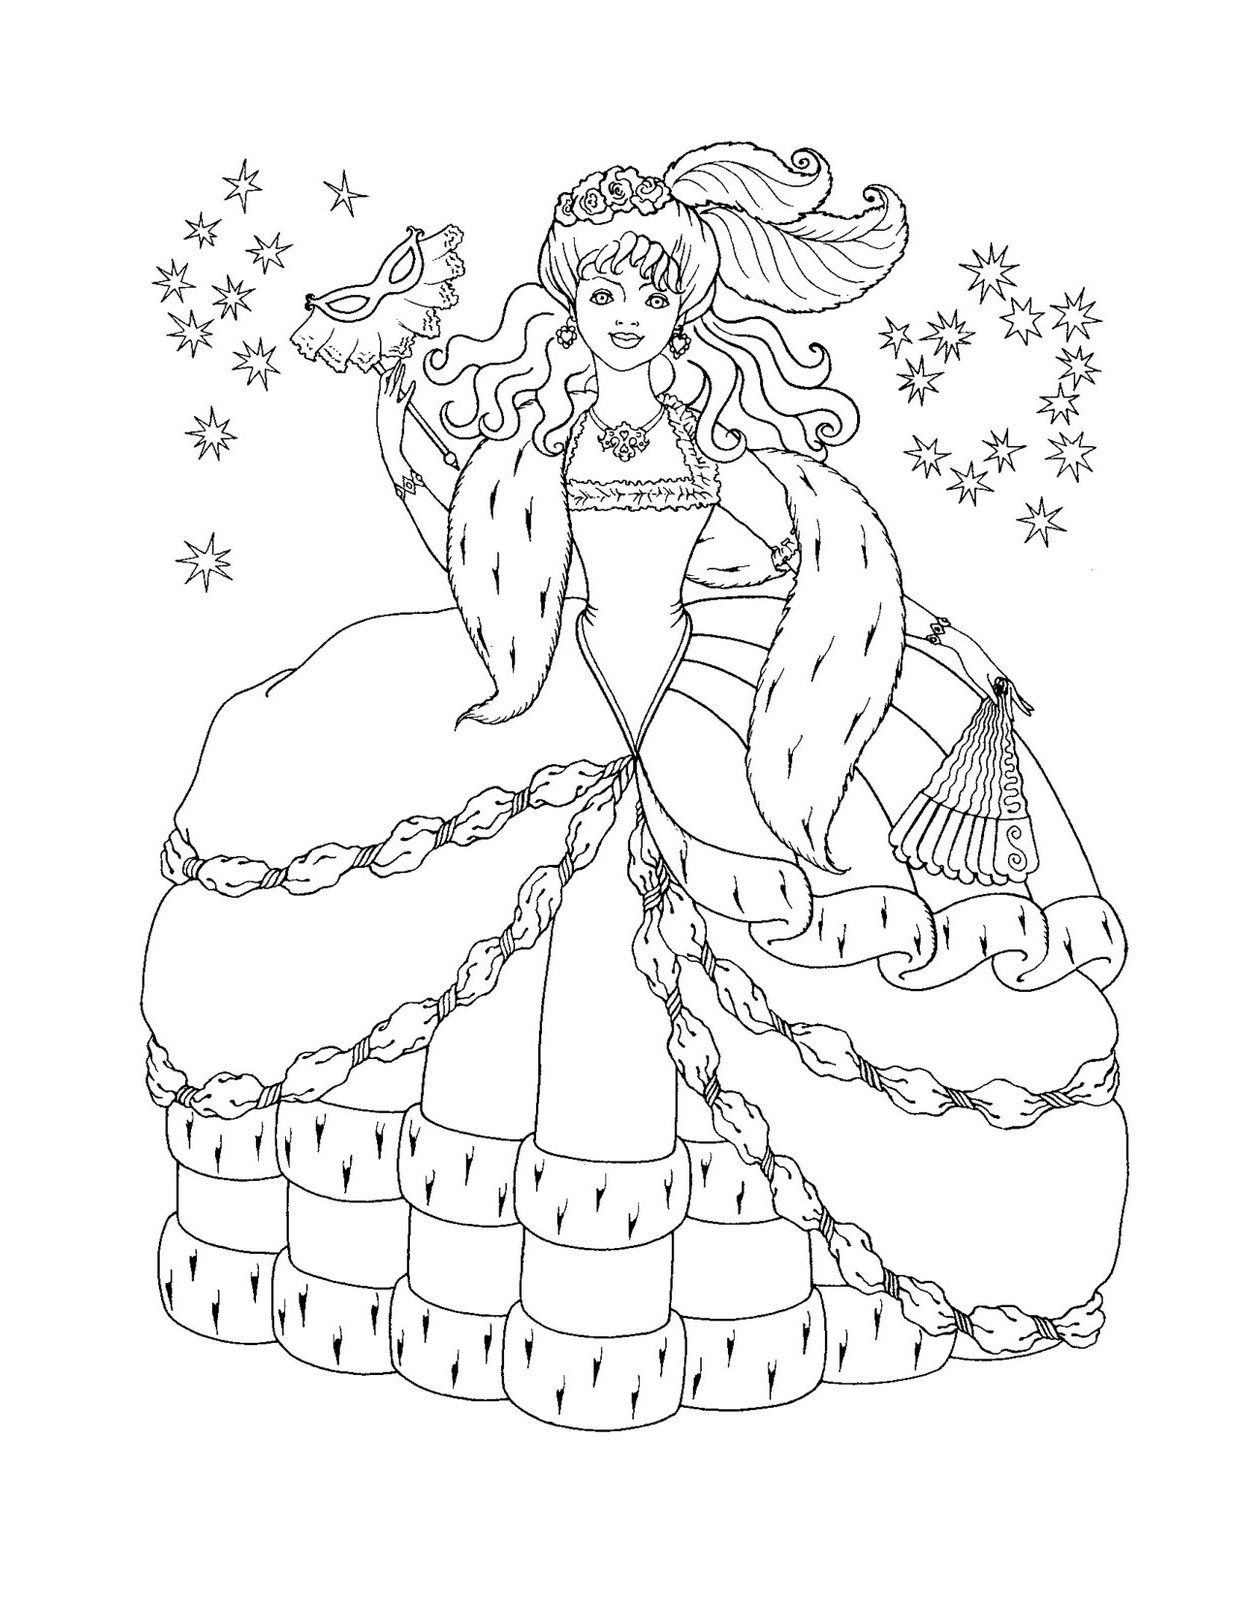 Princess Coloring Pages For Kids
 Free Printable Disney Princess Coloring Pages For Kids